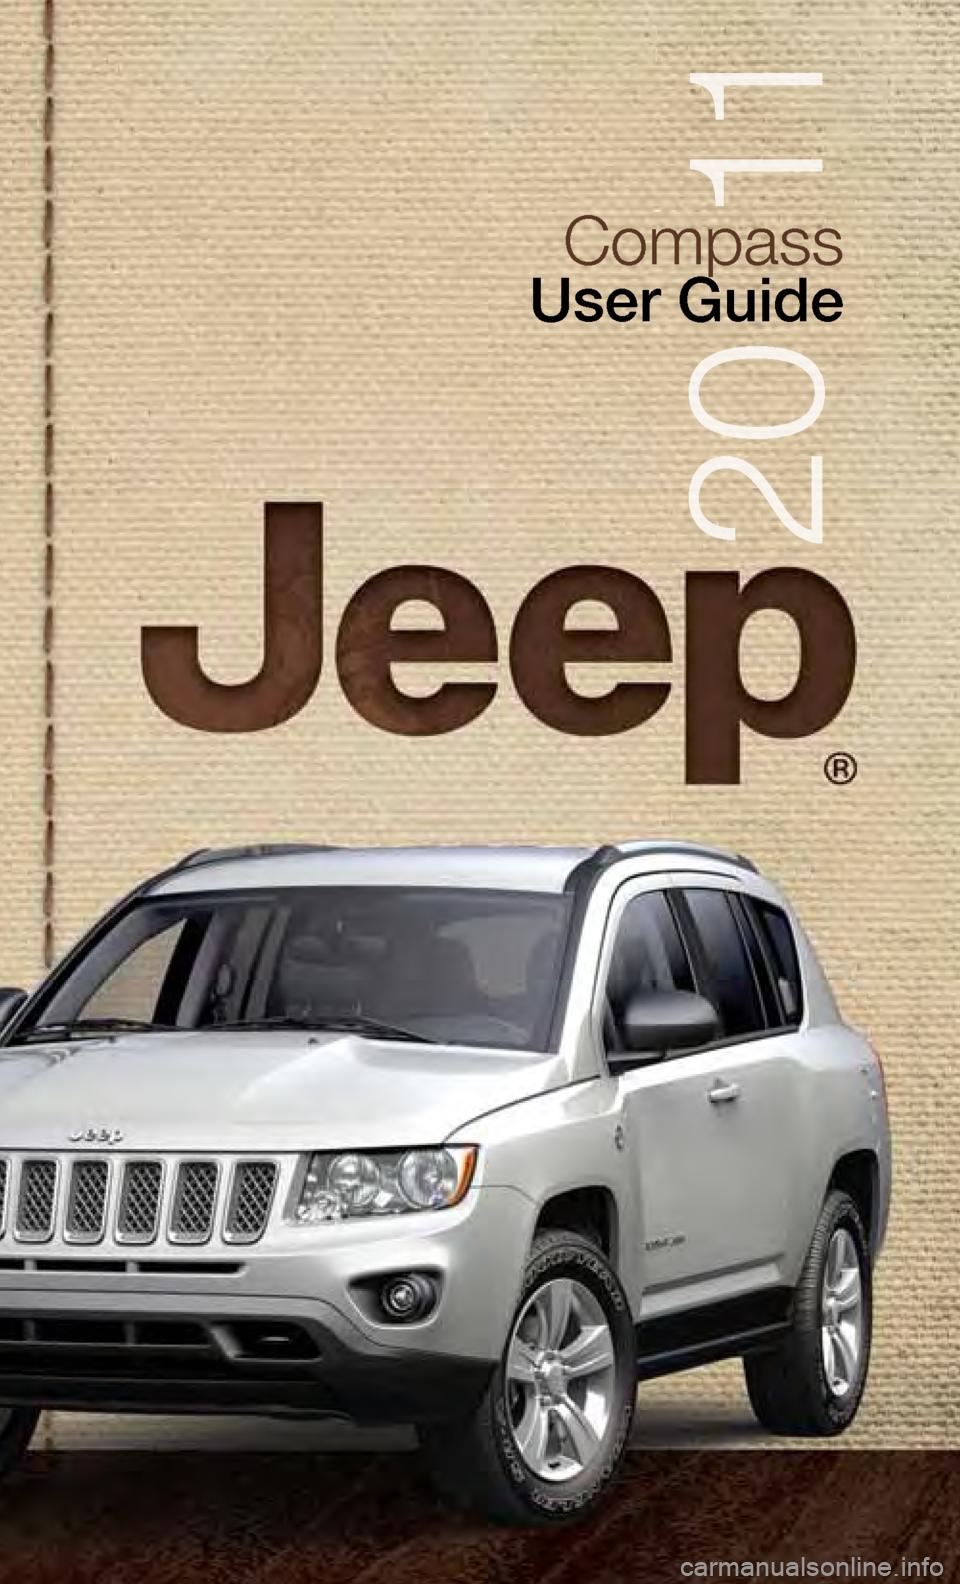 JEEP COMPASS 2011 1.G User Guide Compass
User Guide
2 0   11  